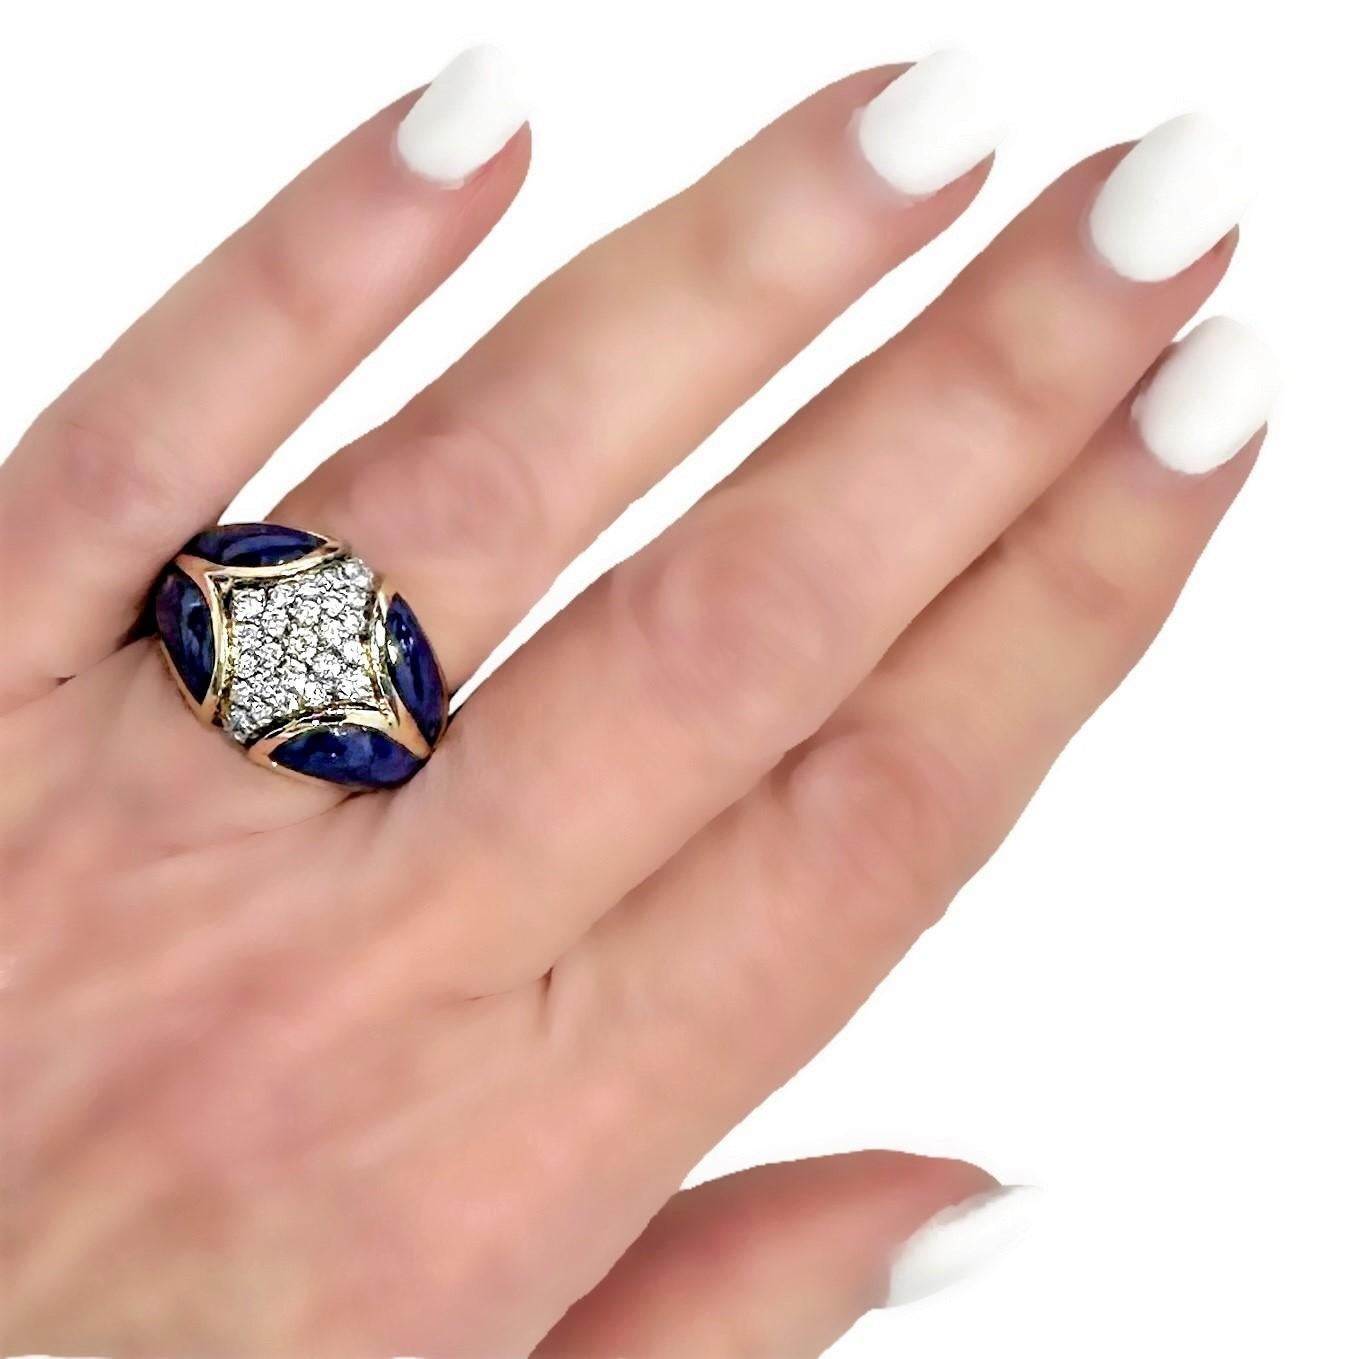 Late-20th Century 18k Yellow Gold, Lapis-Lazuli and Diamond Fashion Ring For Sale 4